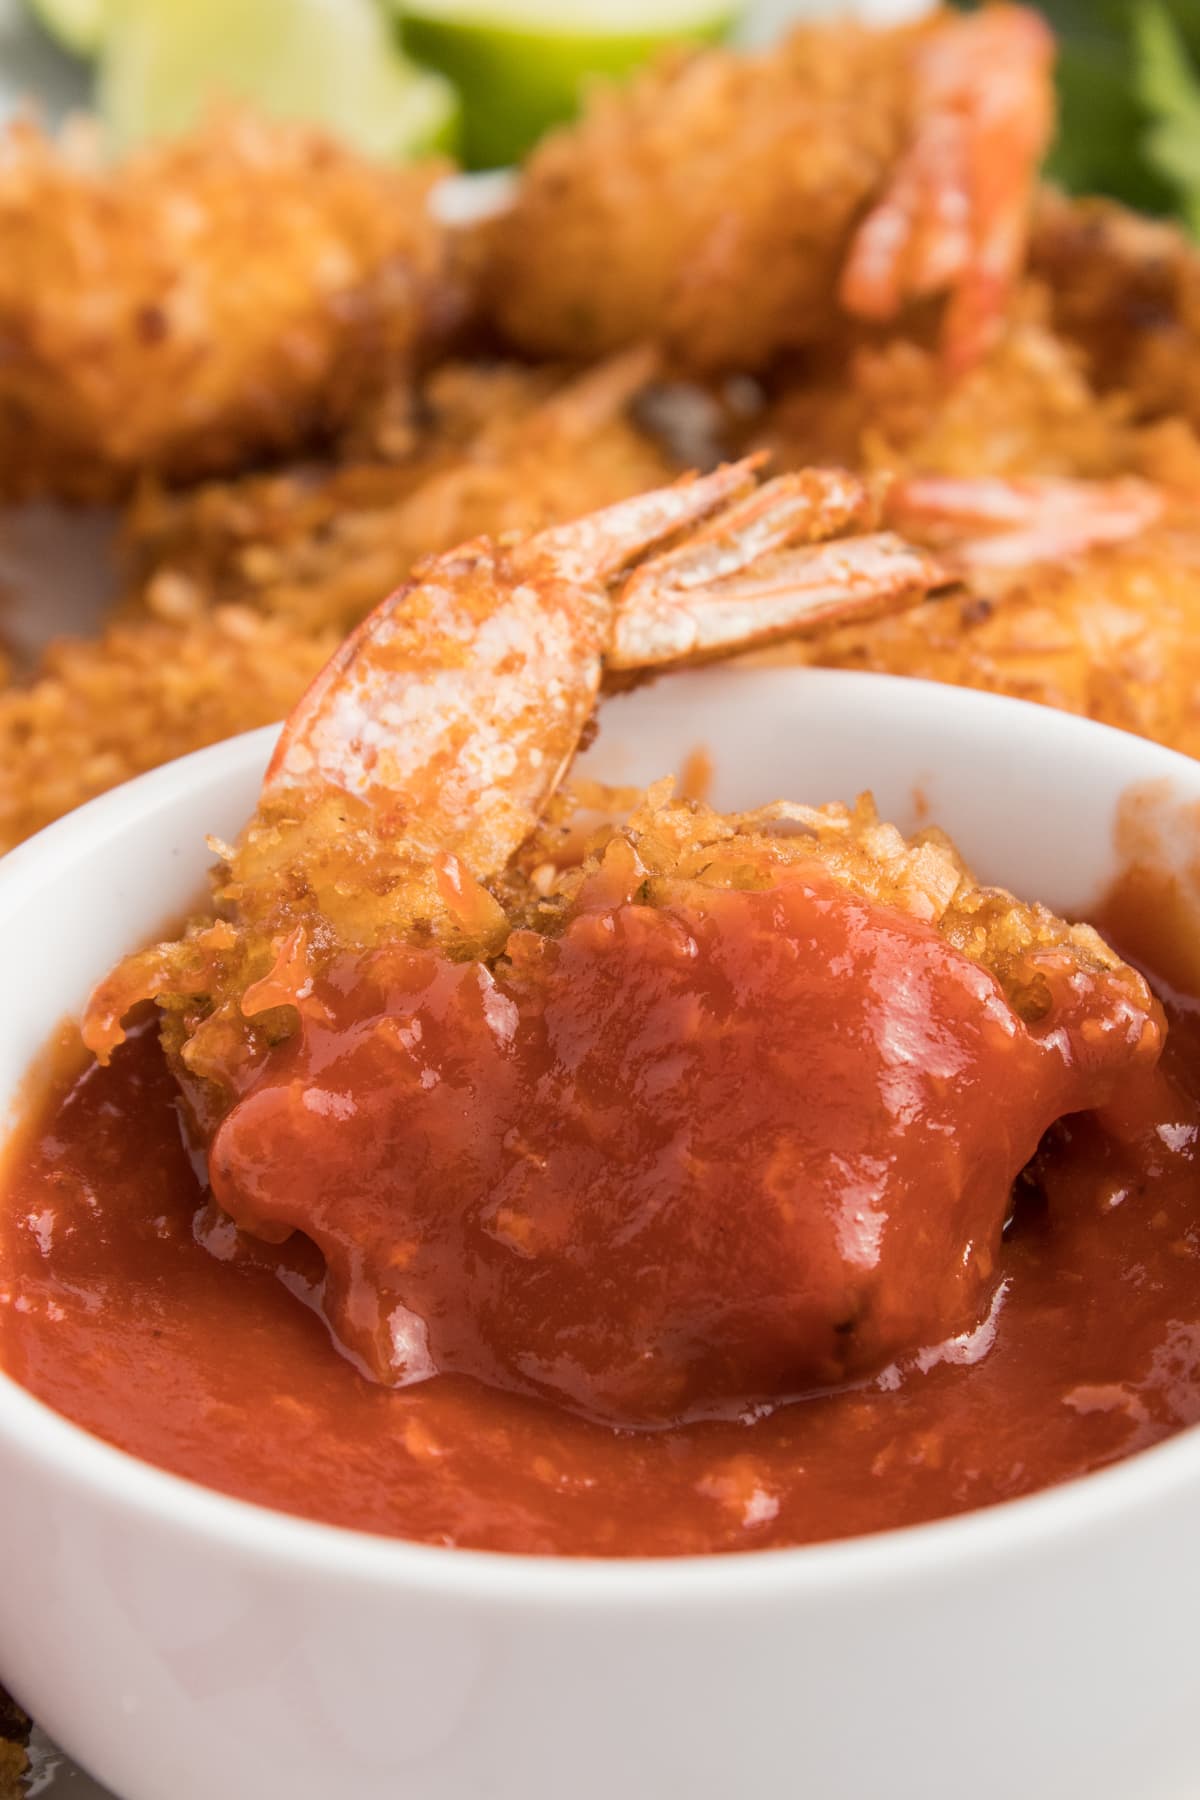 A coconut shrimp in sweet chili sauce